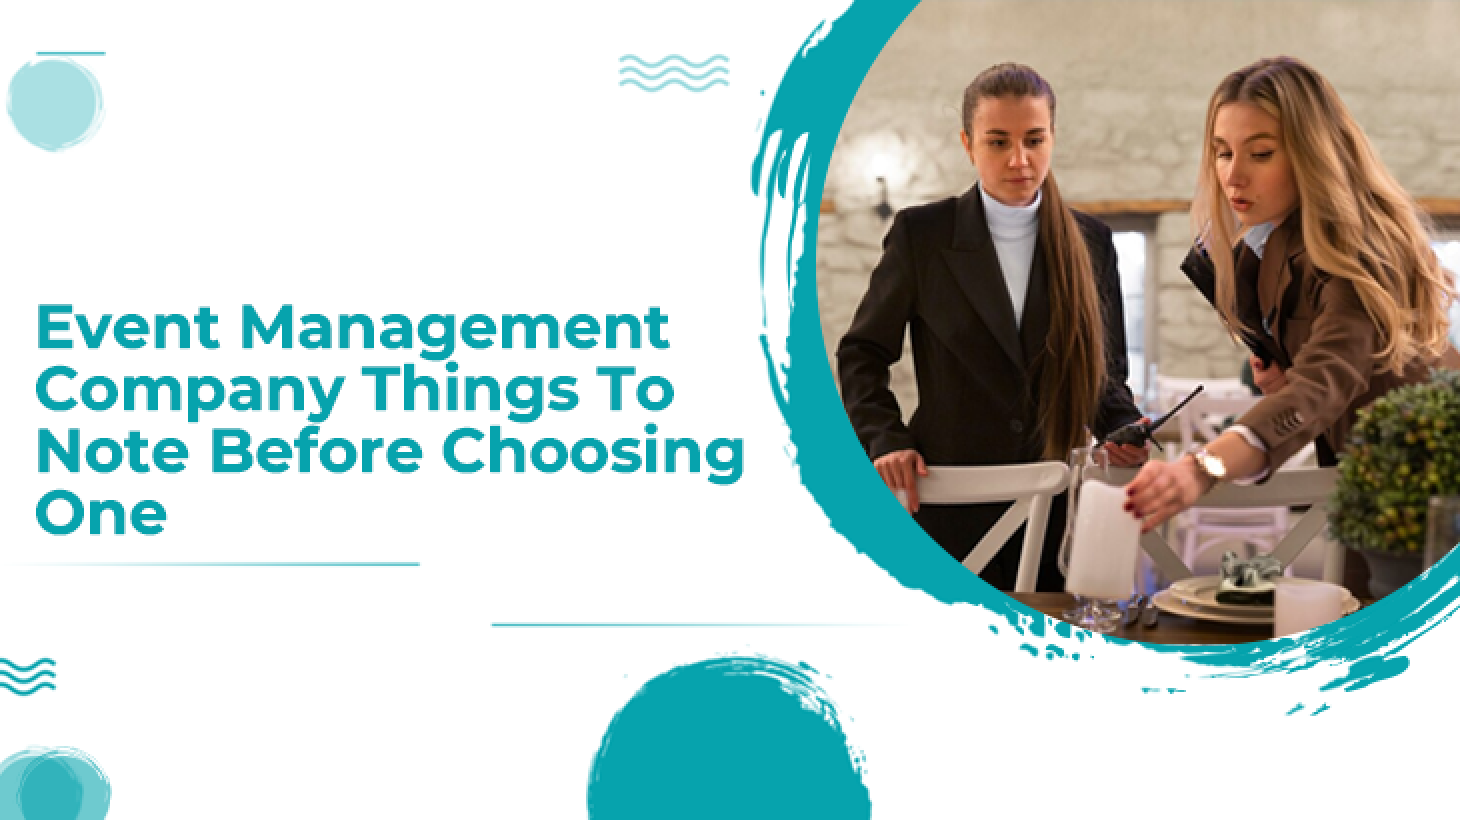 Event Management Company Things To Note Before Choosing One